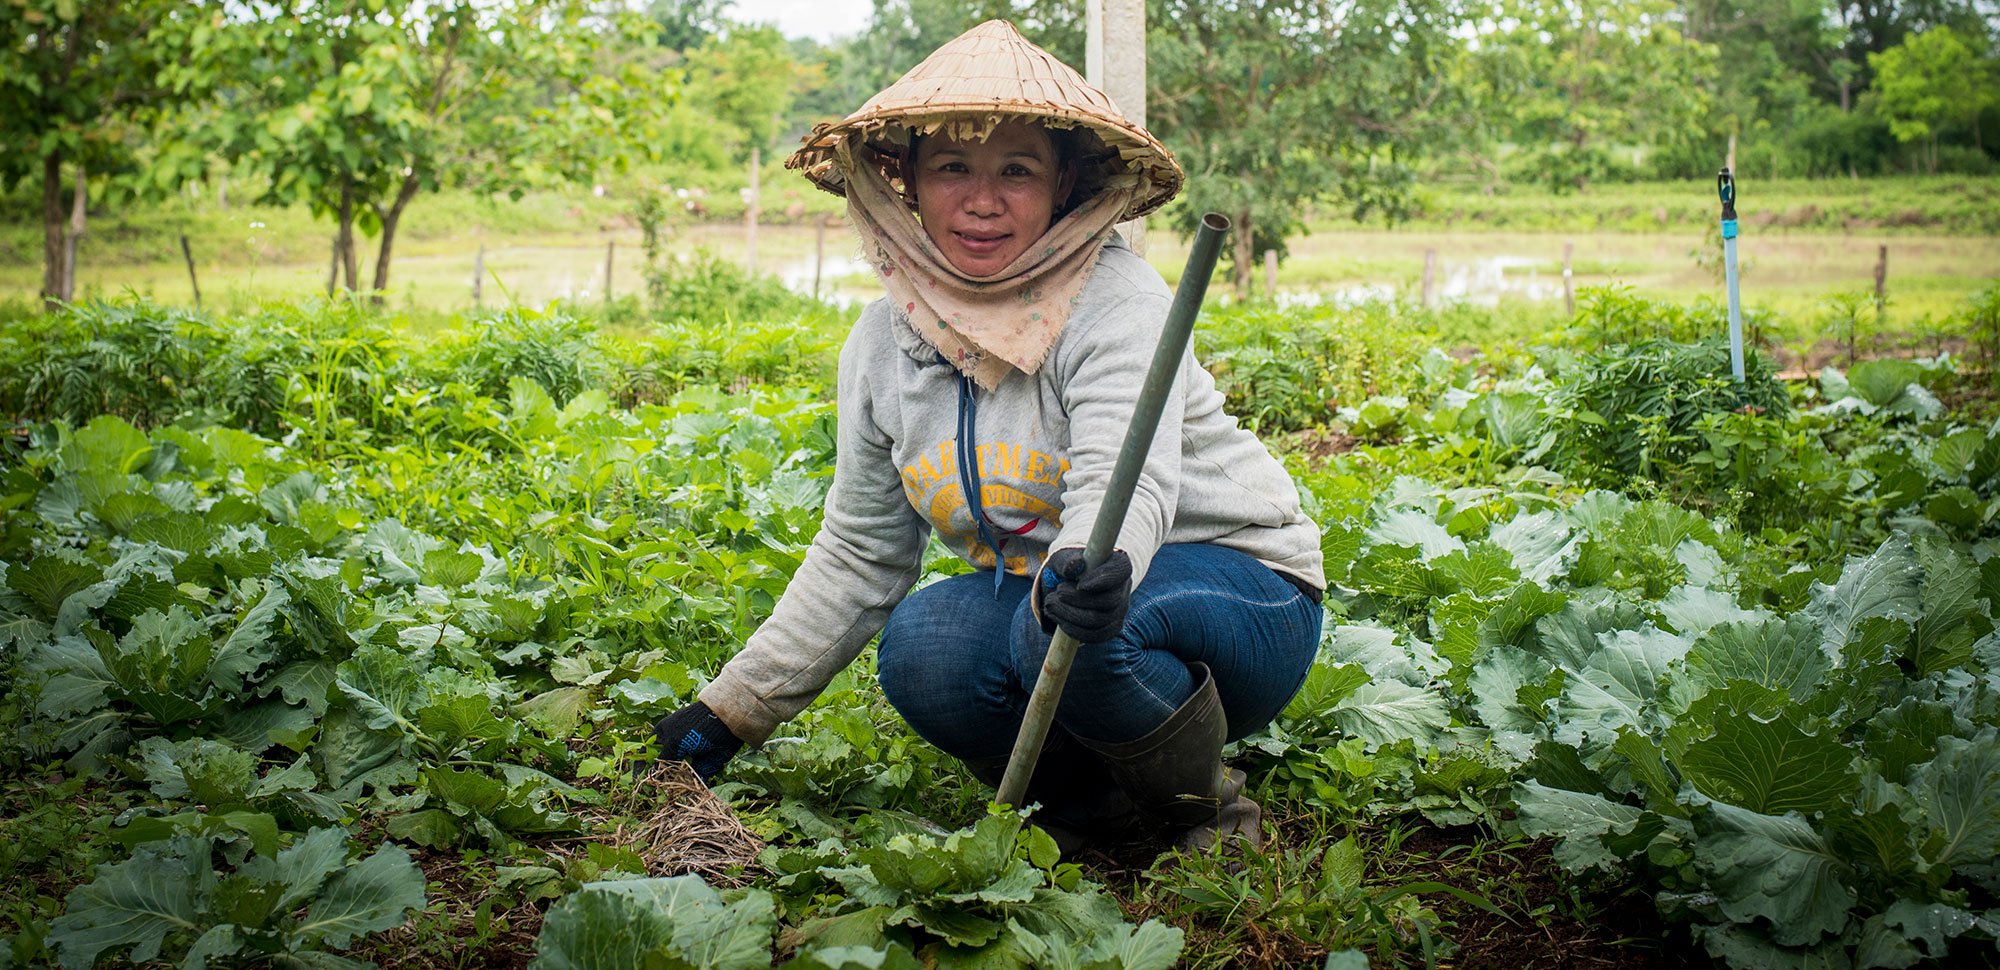 A woman working in a garden